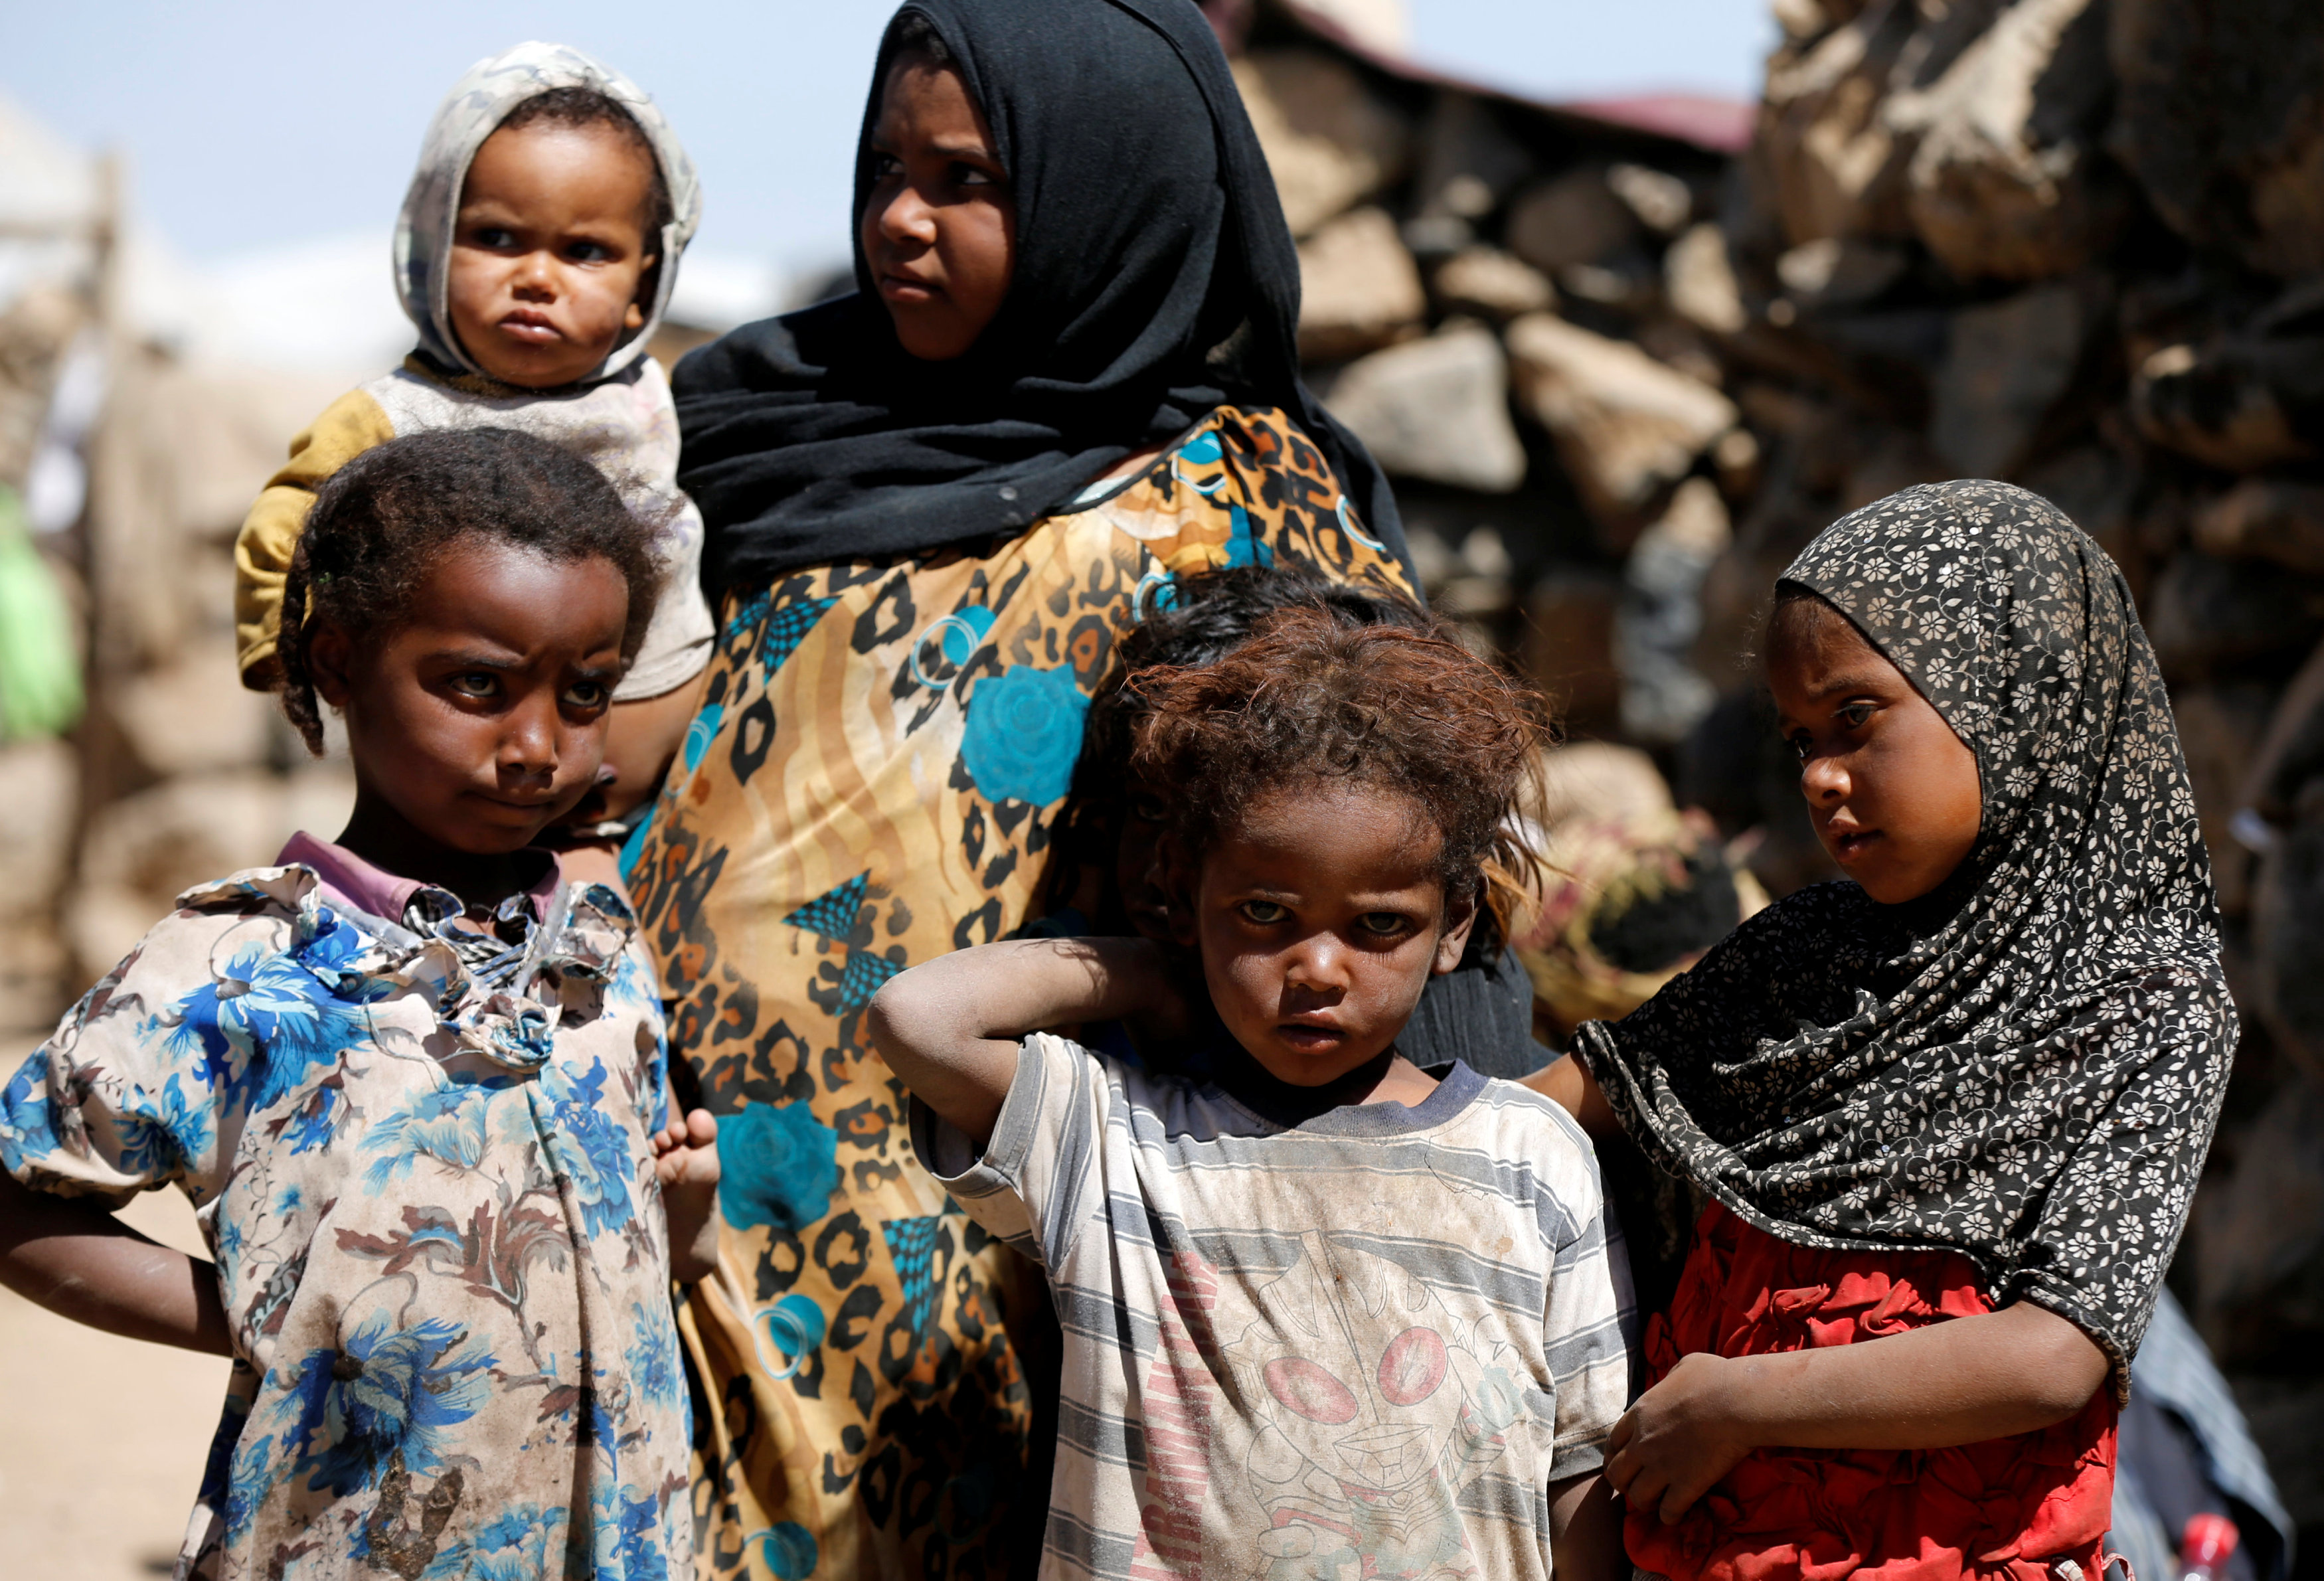 CAFOD and other NGOs urge prayer for desperate situation in Yemen